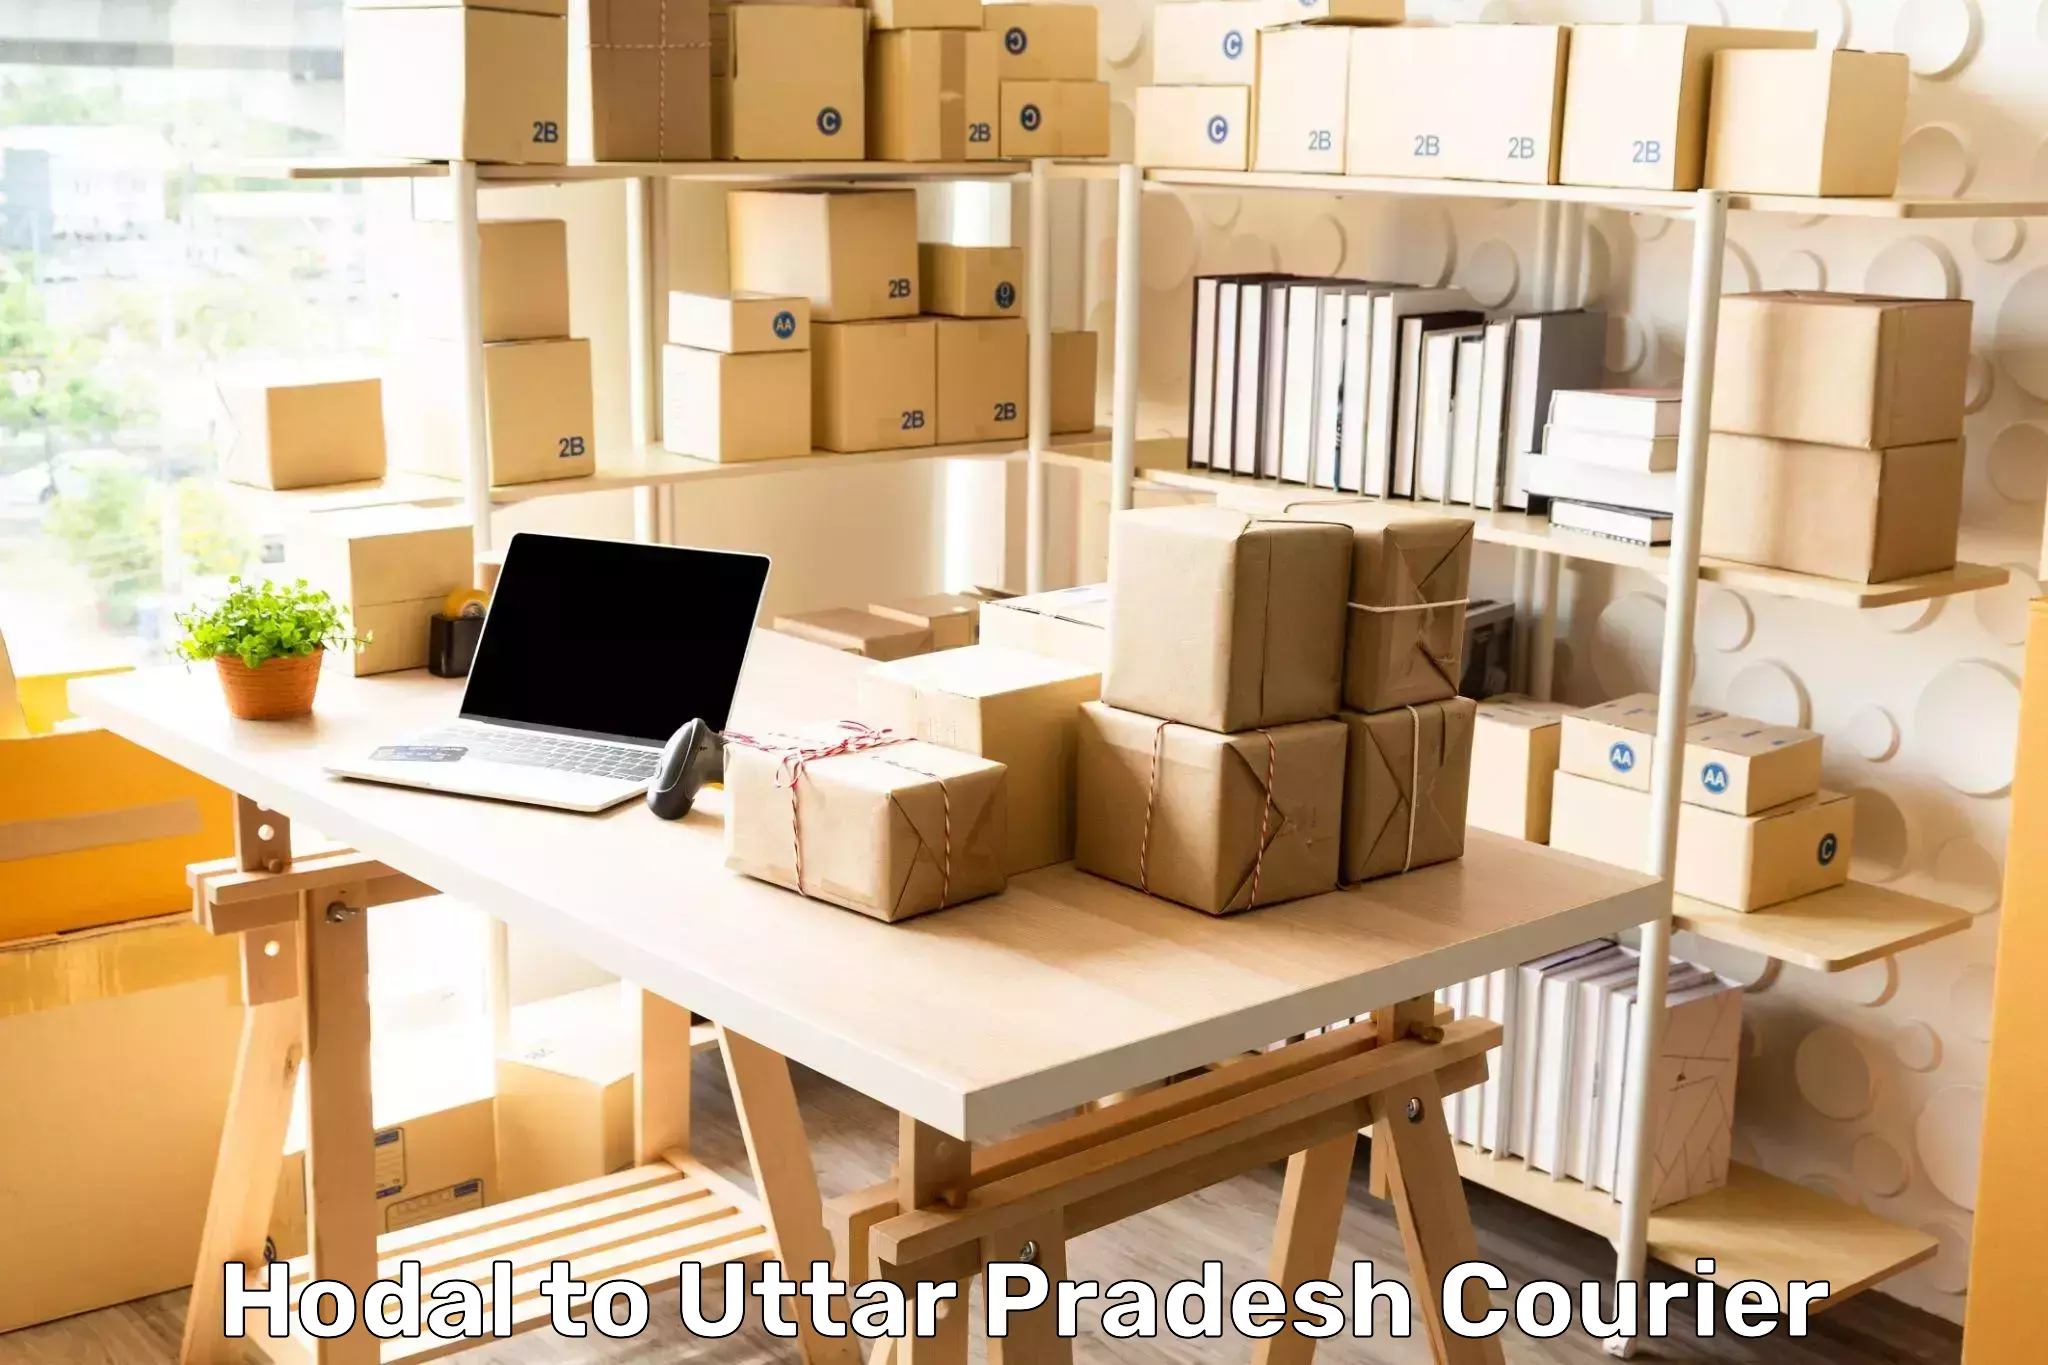 Seamless shipping experience Hodal to Fatehabad Agra